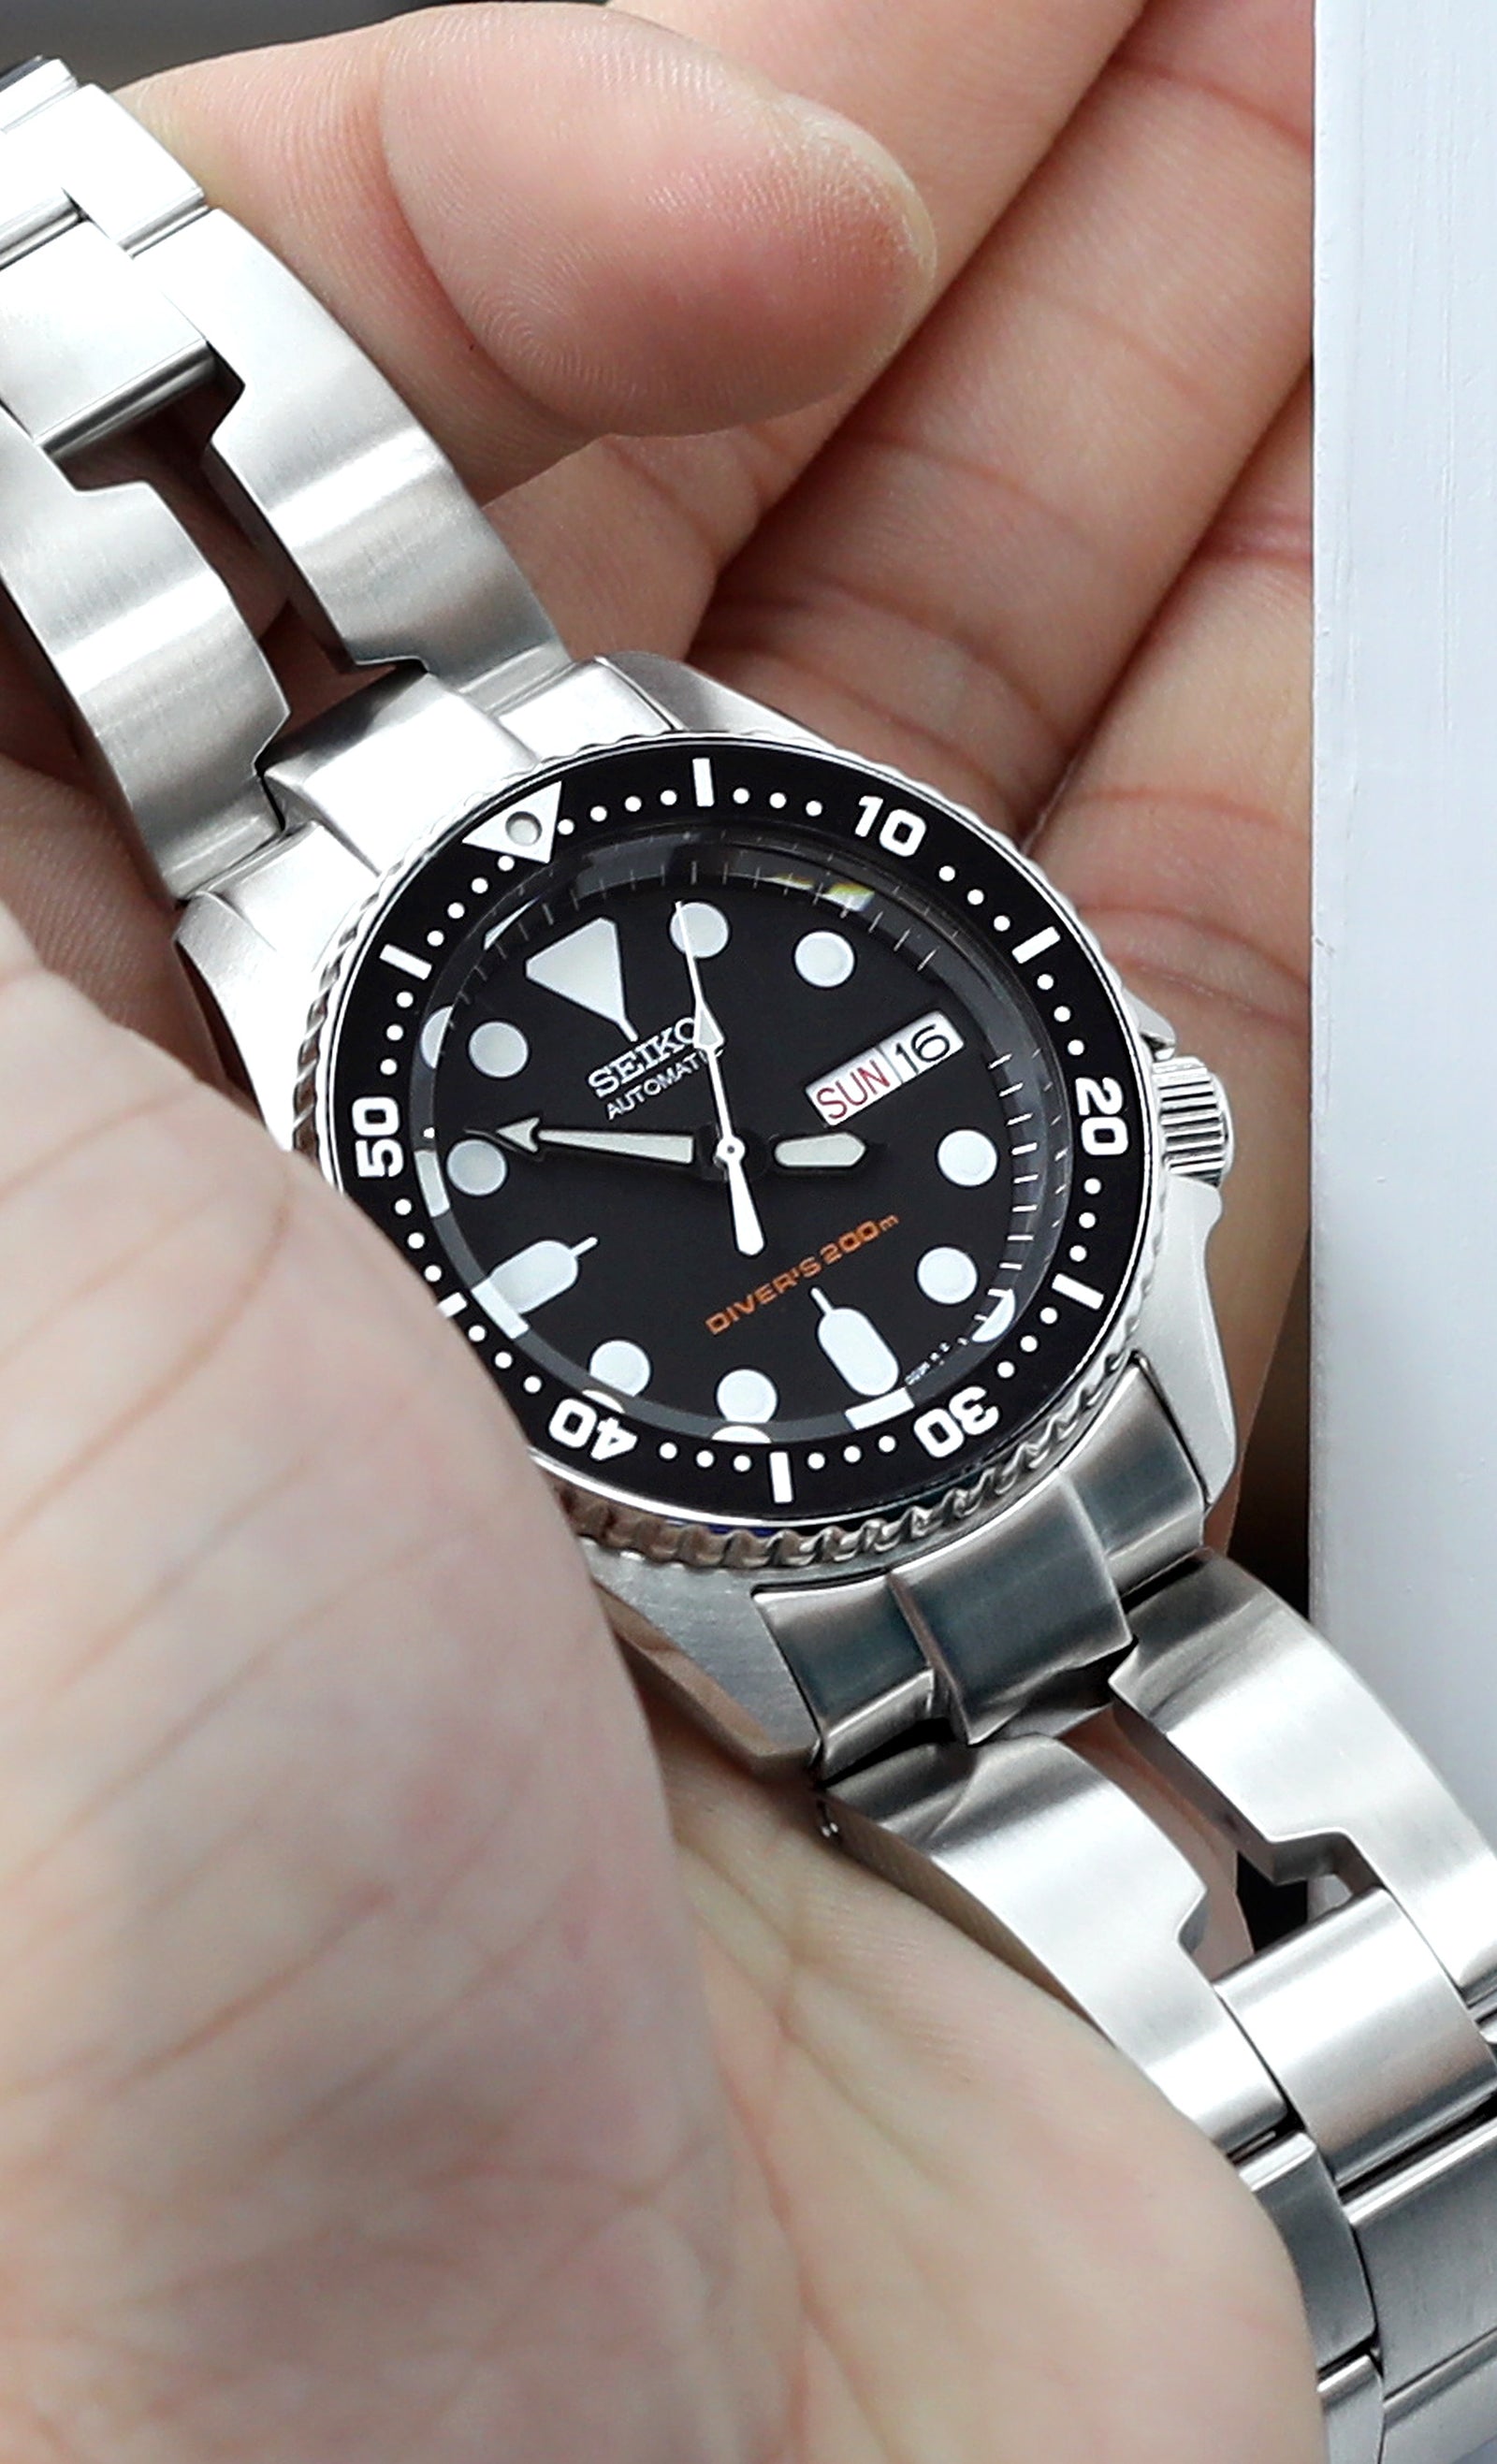 Seiko] New bracelets for the SKX and the Turtle : r/Watches